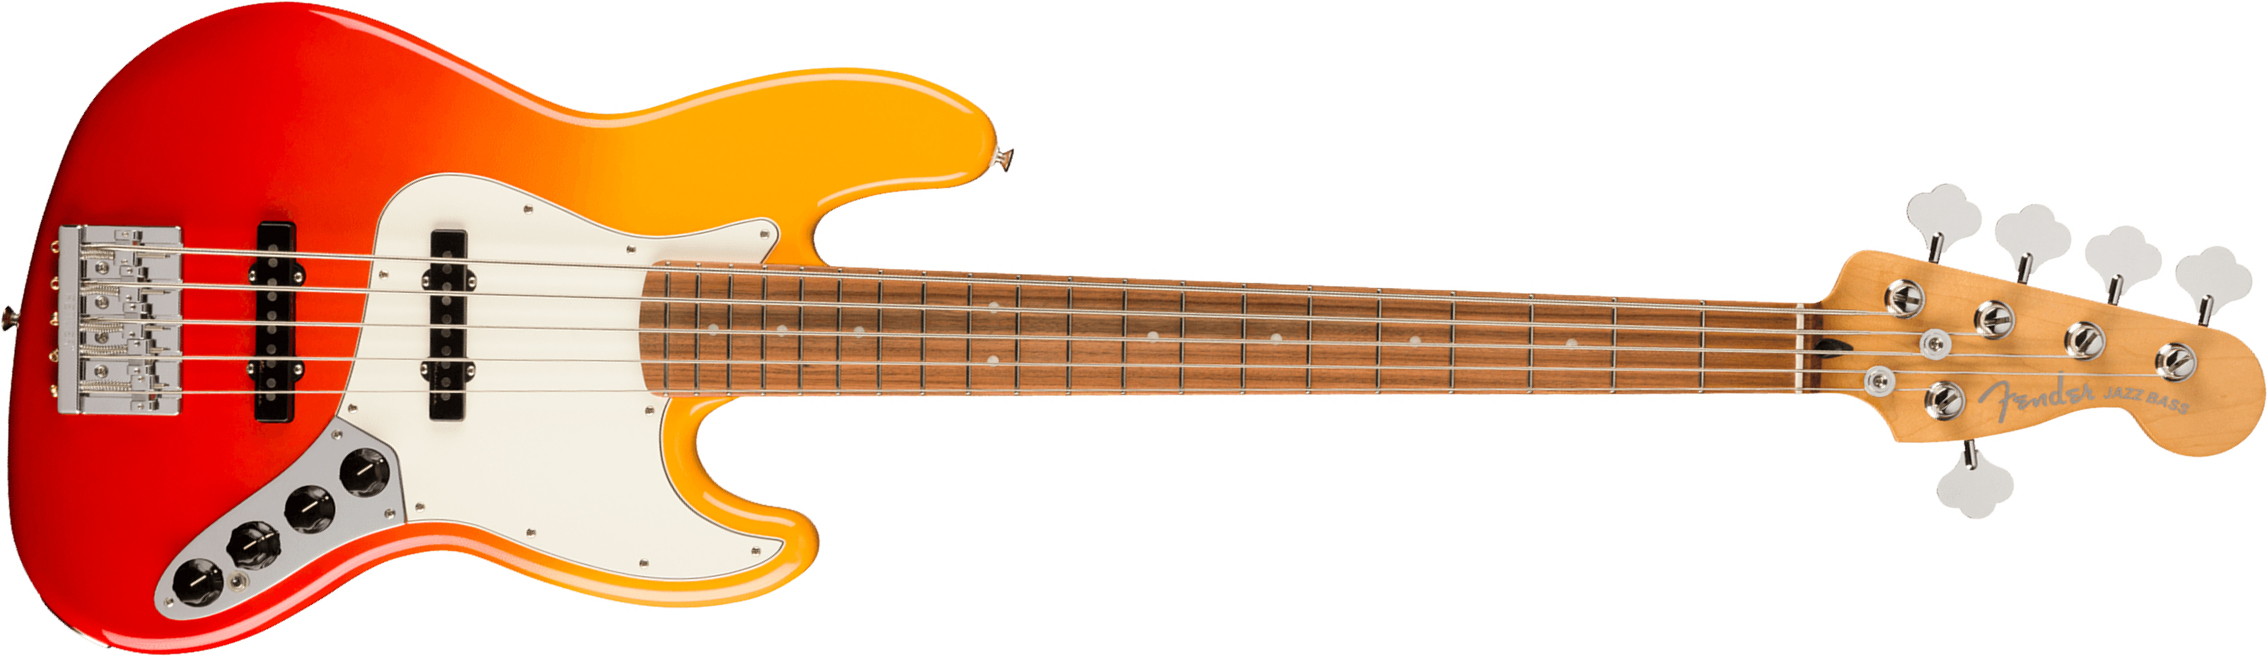 Fender Jazz Bass Player Plus V Mex 5c Active Pf - Tequila Sunrise - Solidbody E-bass - Main picture